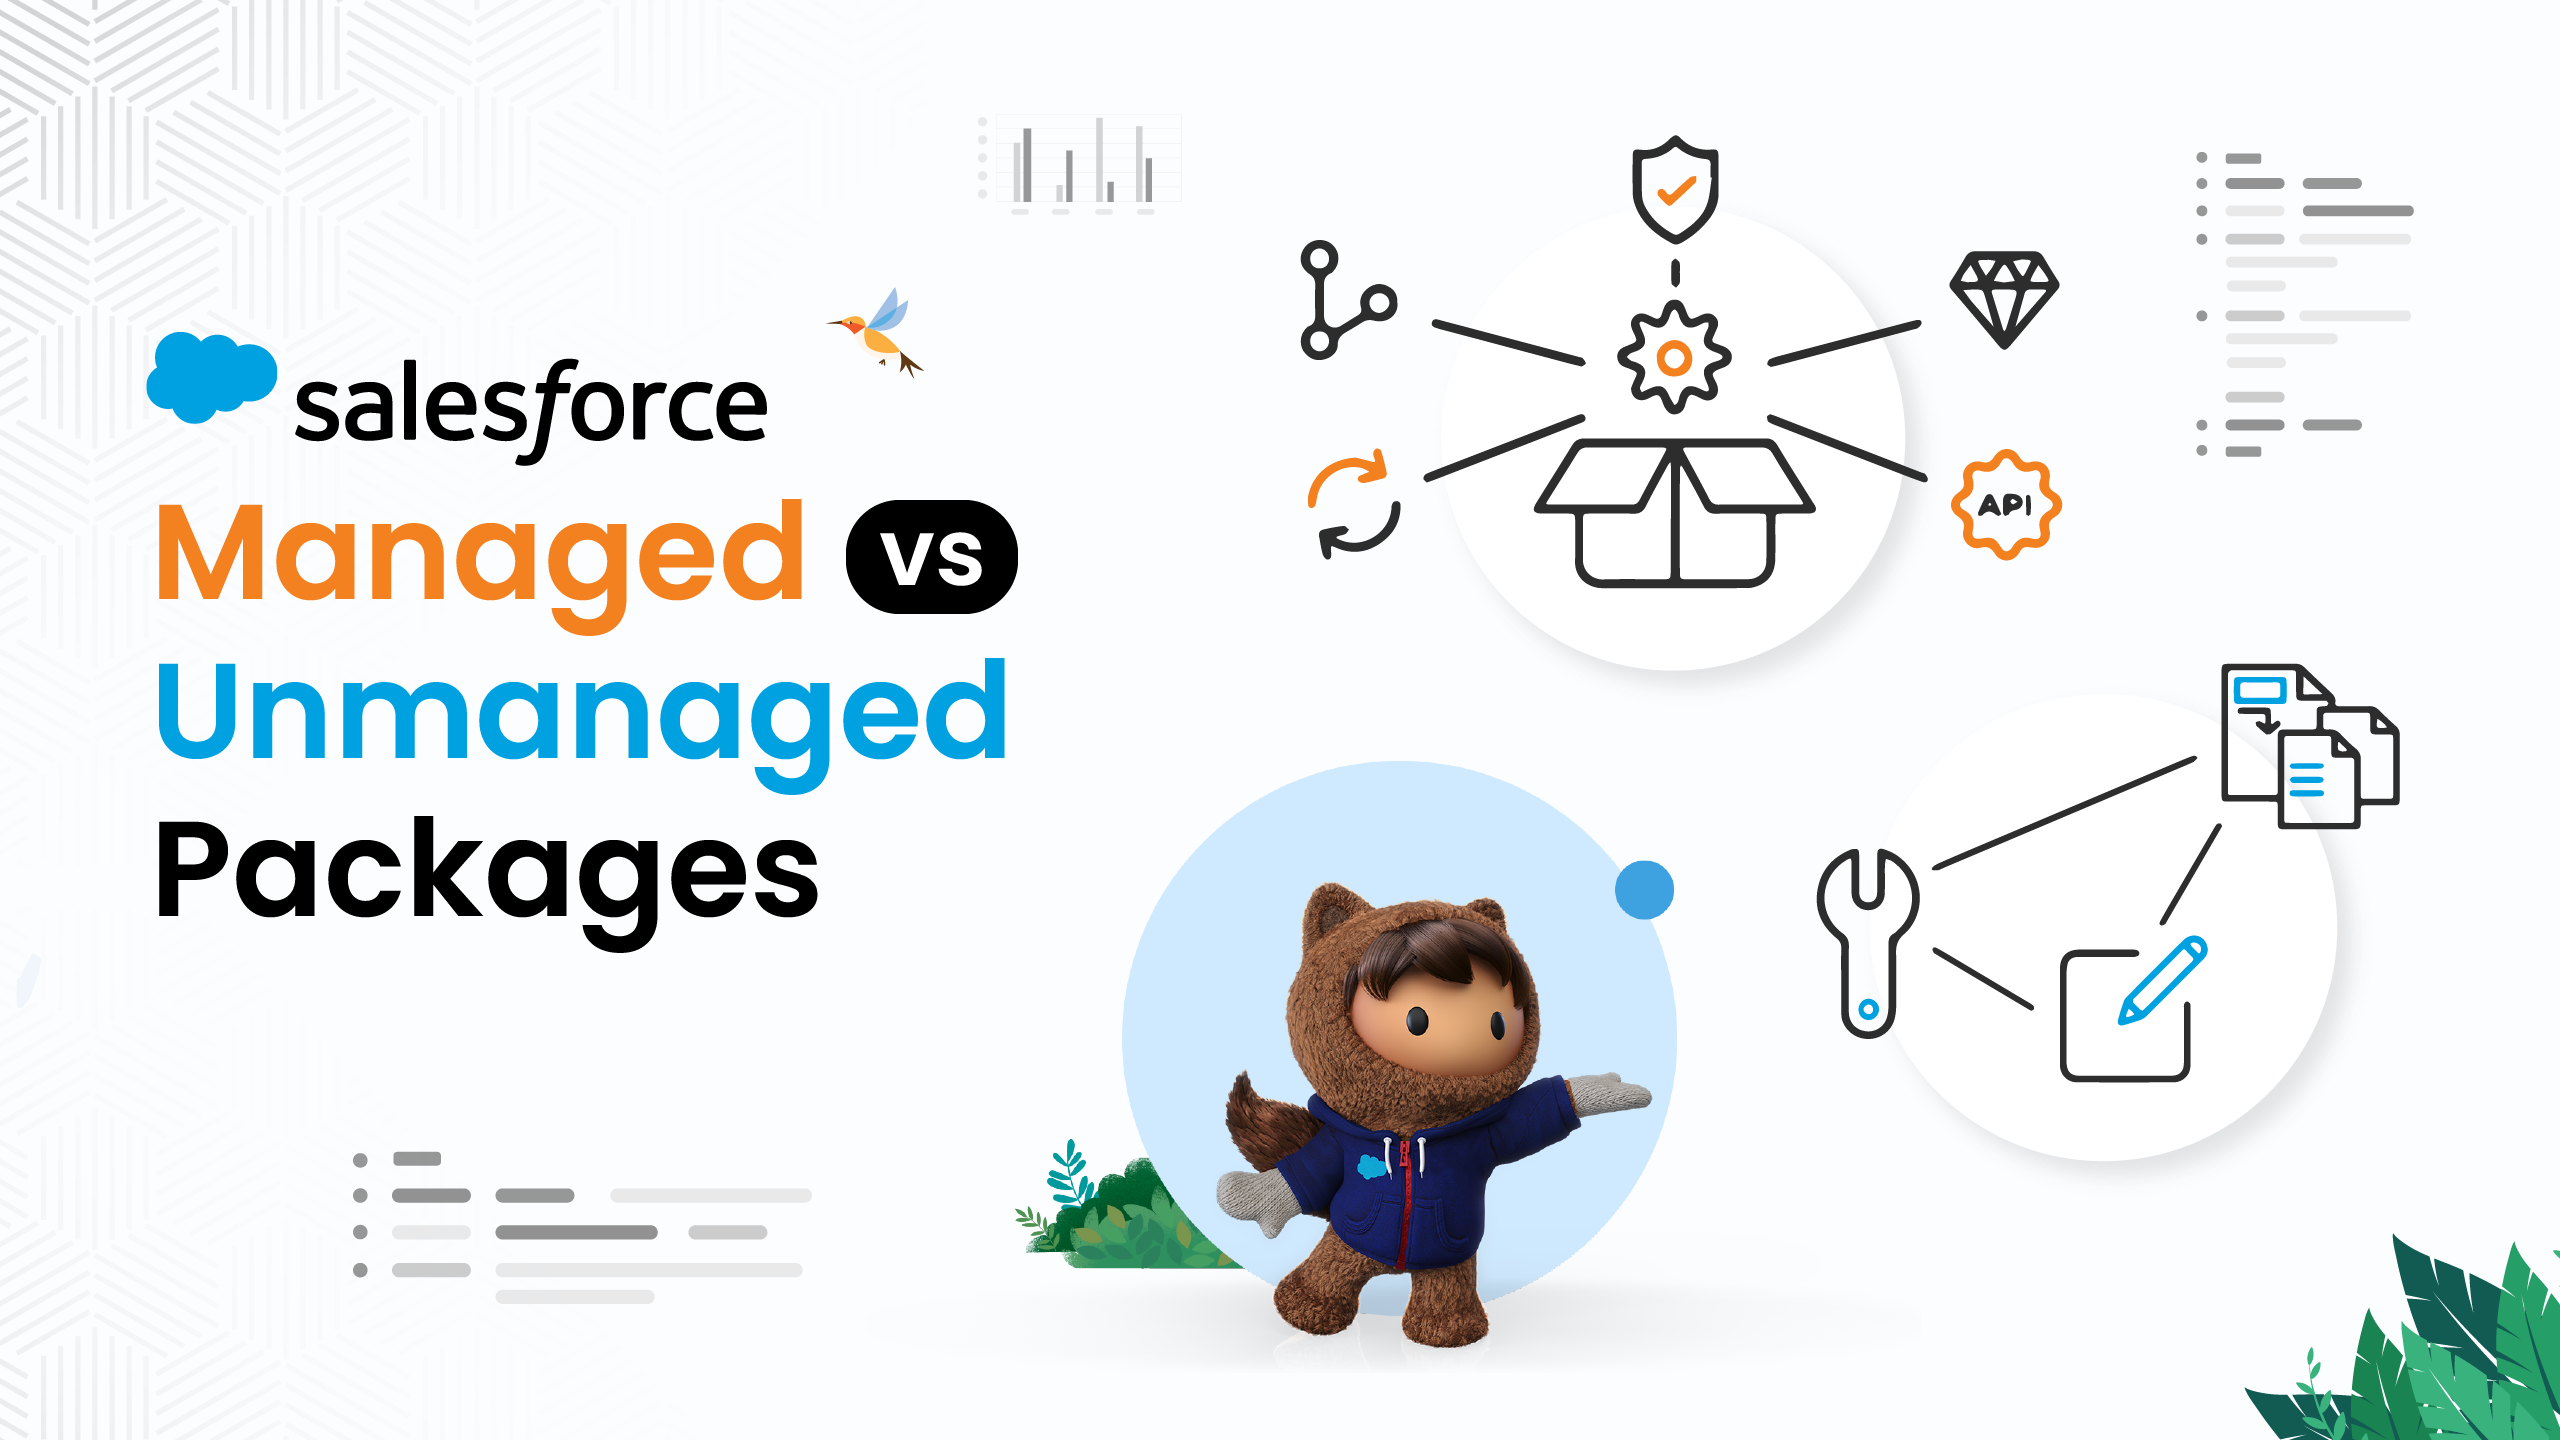 Salesforce Managed vs Unmanaged Packages